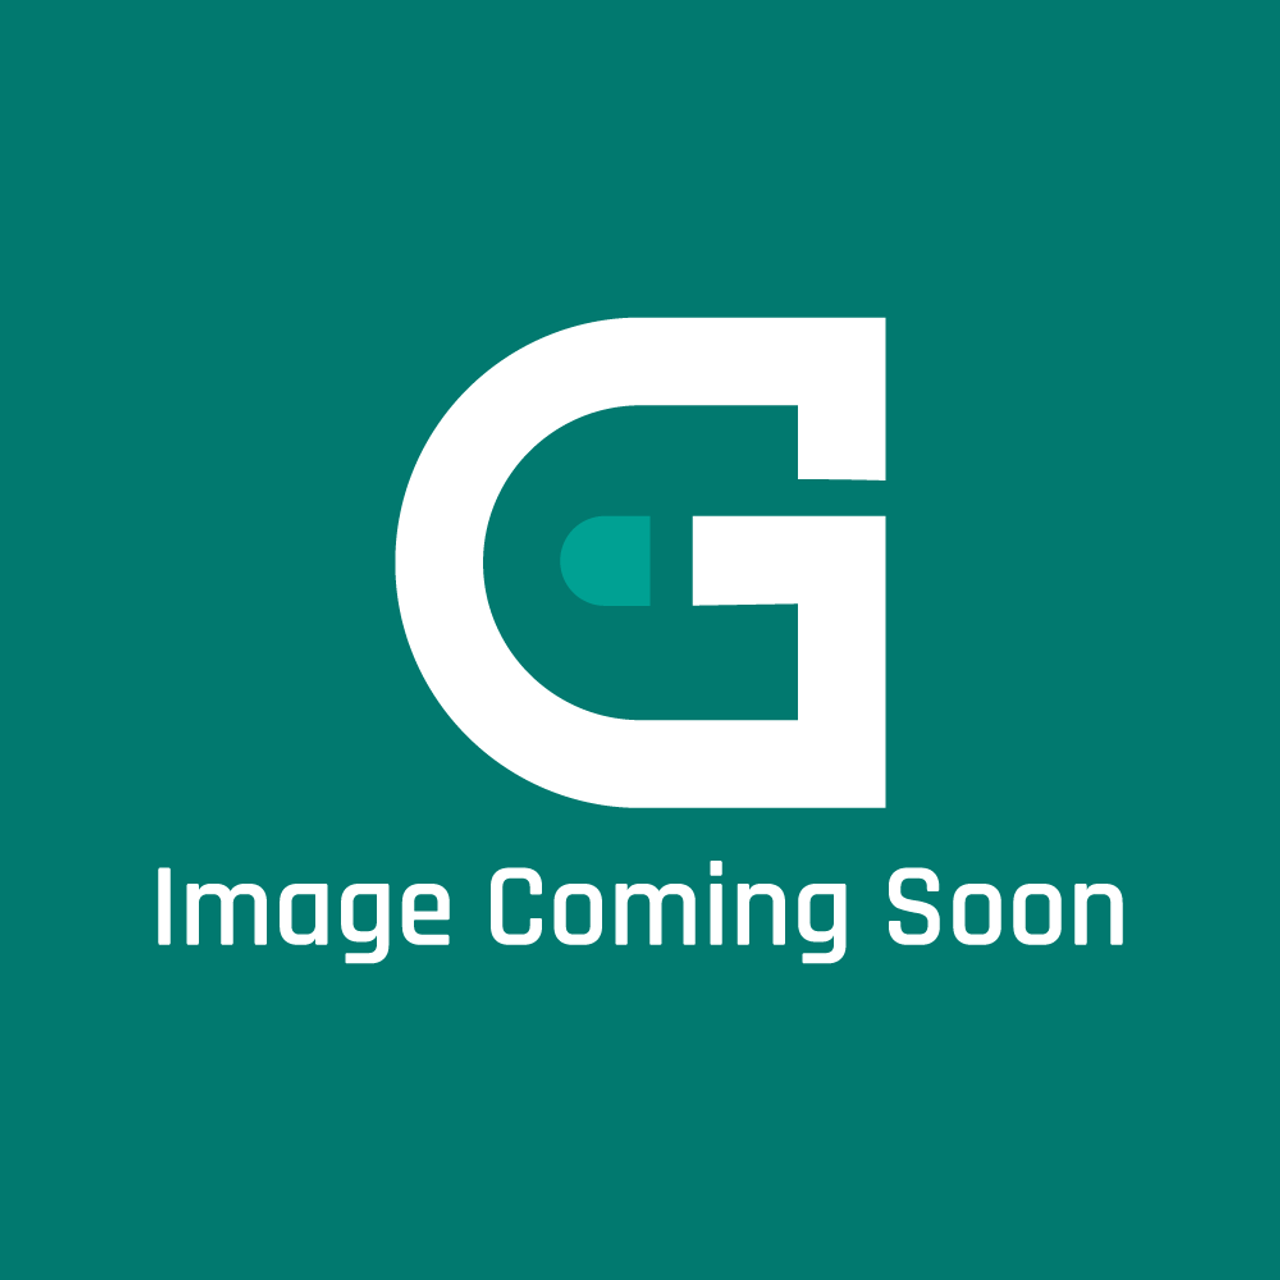 Frigidaire - Electrolux 117495104 Outer Door - Image Coming Soon!